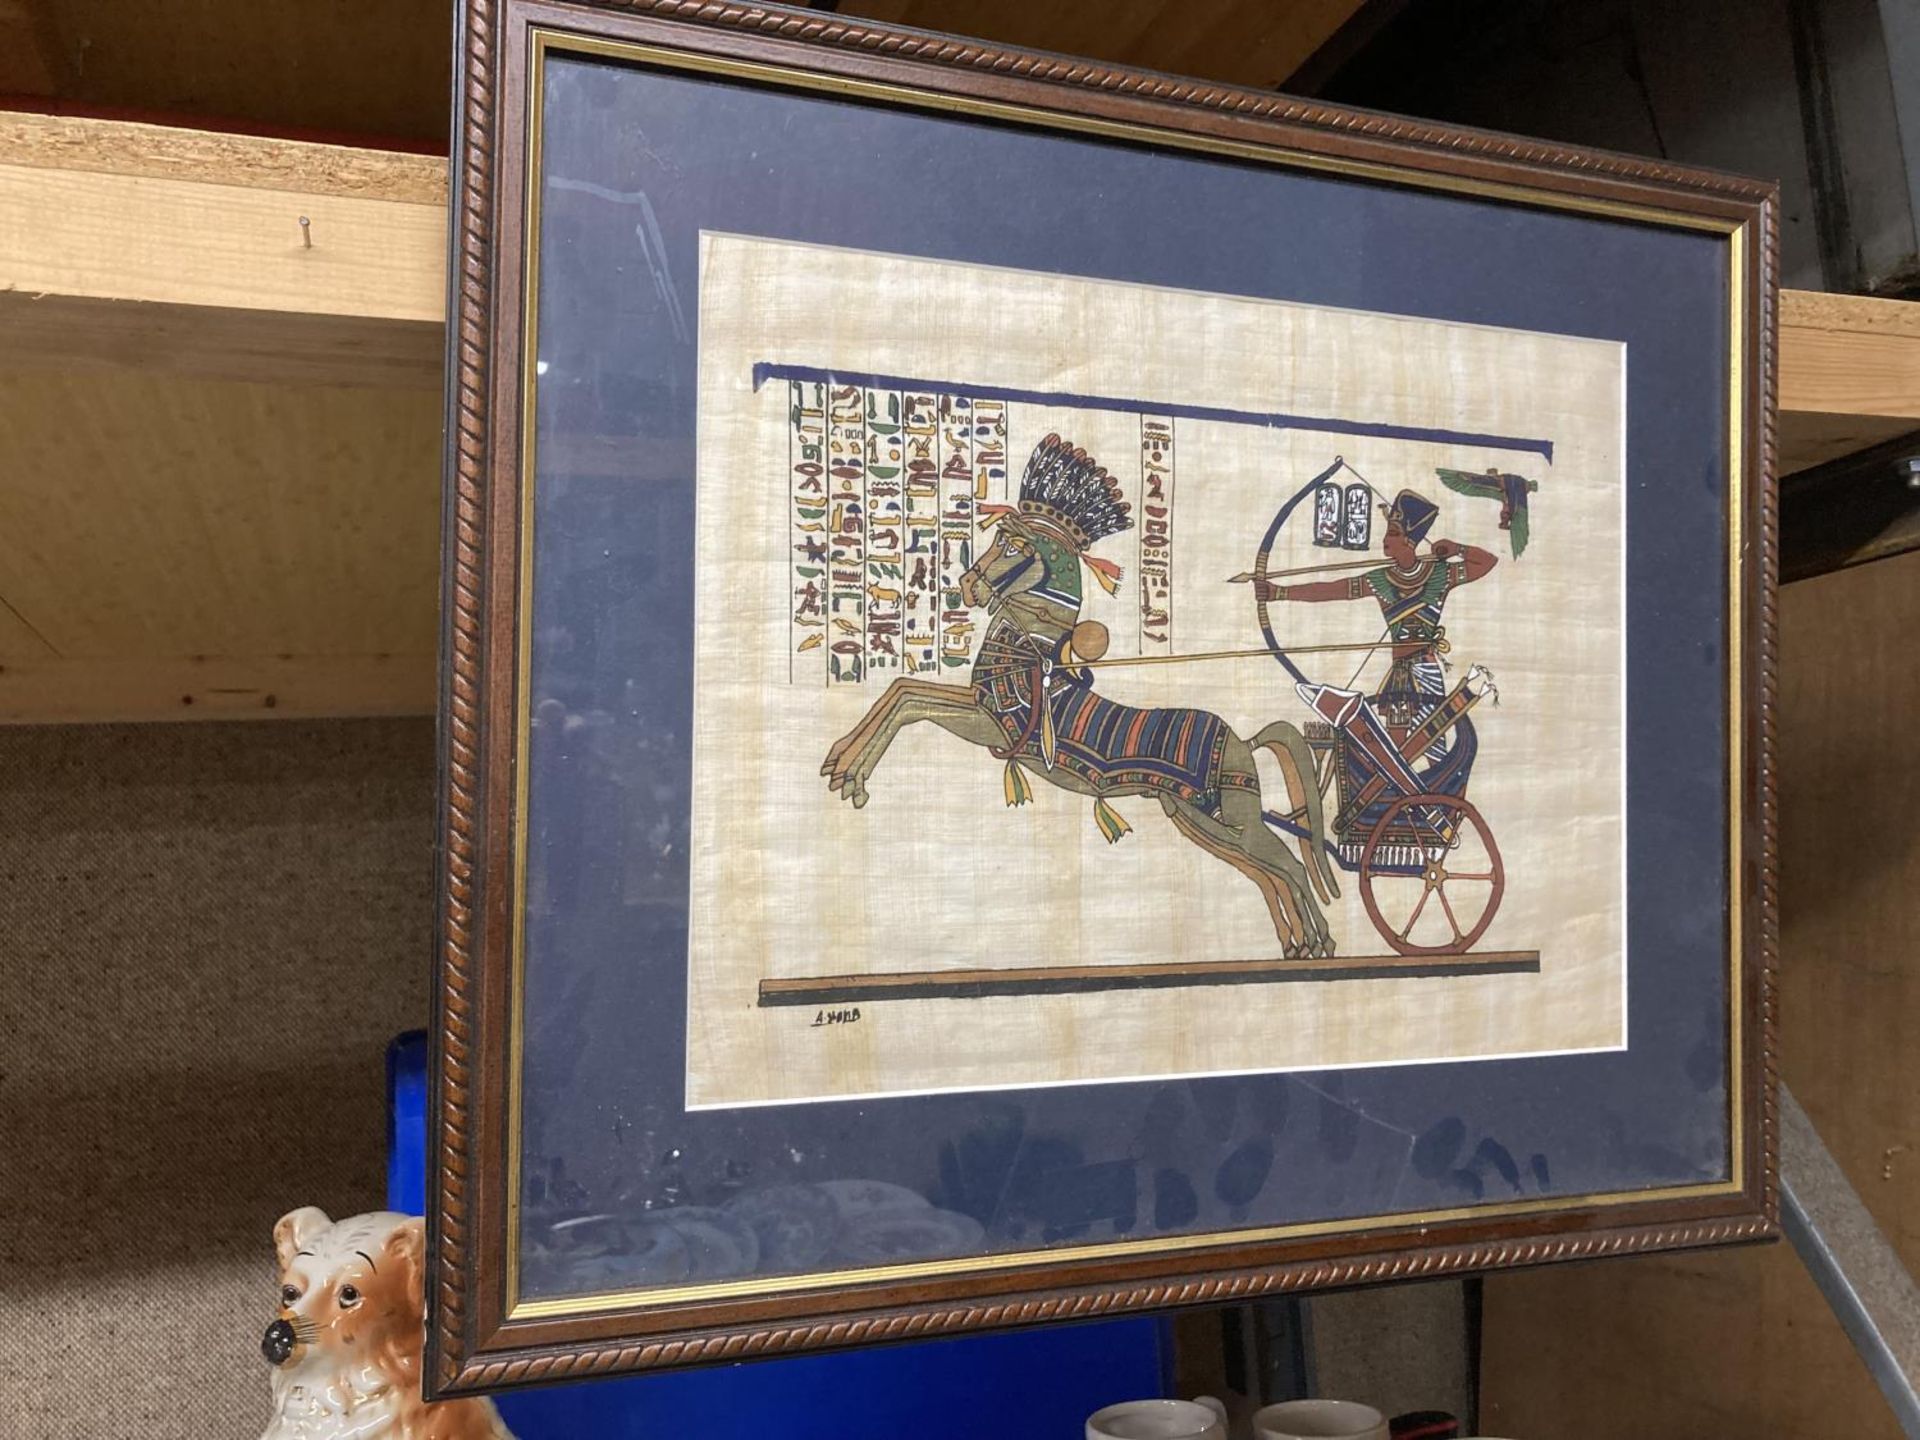 A FRAMED EGYPTIAN PICTURE ON PAPYRUS